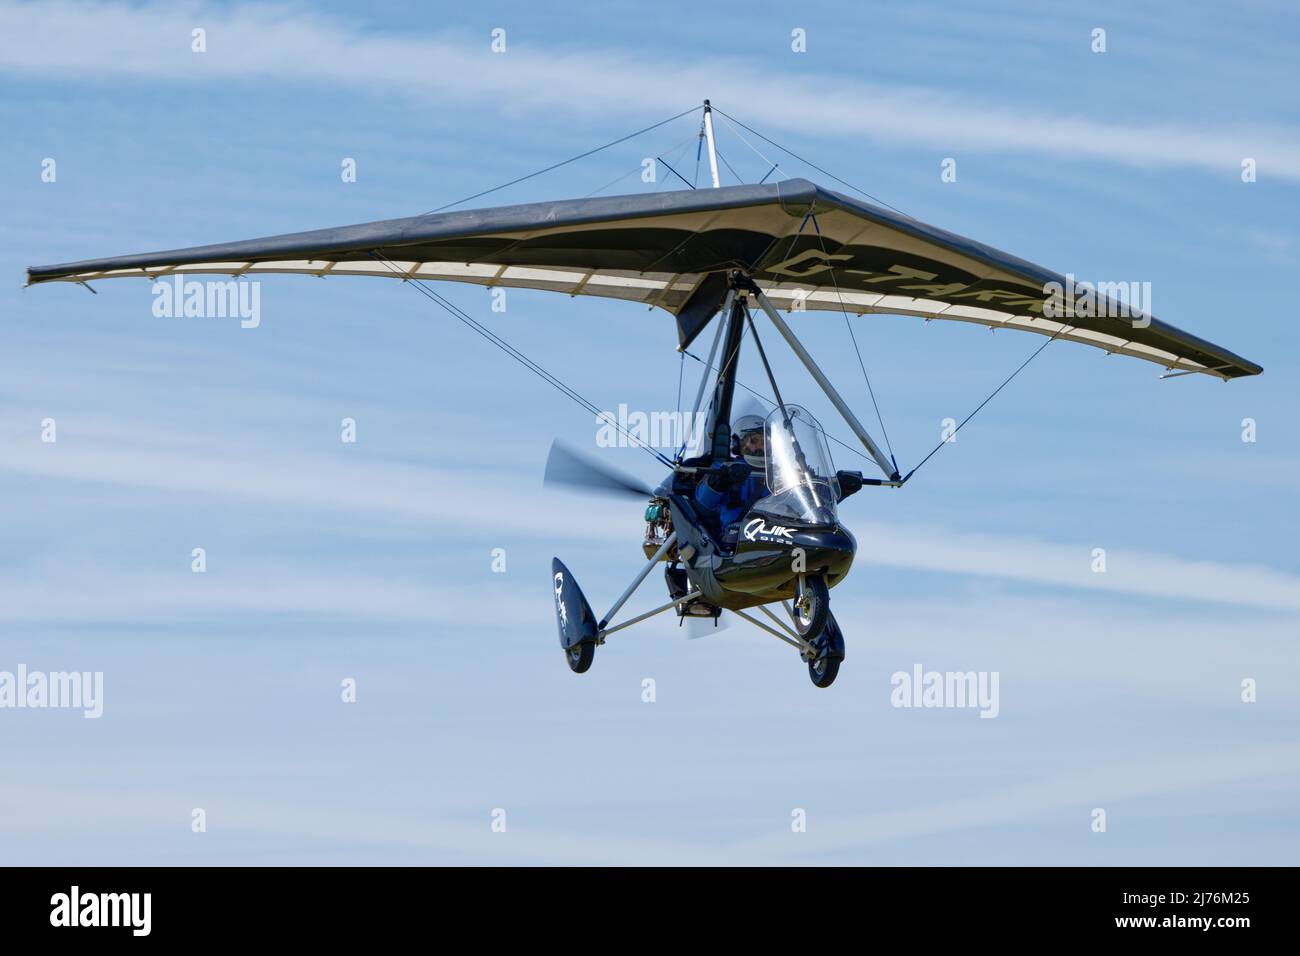 P&M Aviation Pegasus Quik 912S Flexwing Microlight Aircraft G-TARR arrives at Popham airfield in Hampshire England to attend the annual fly-in Stock Photo